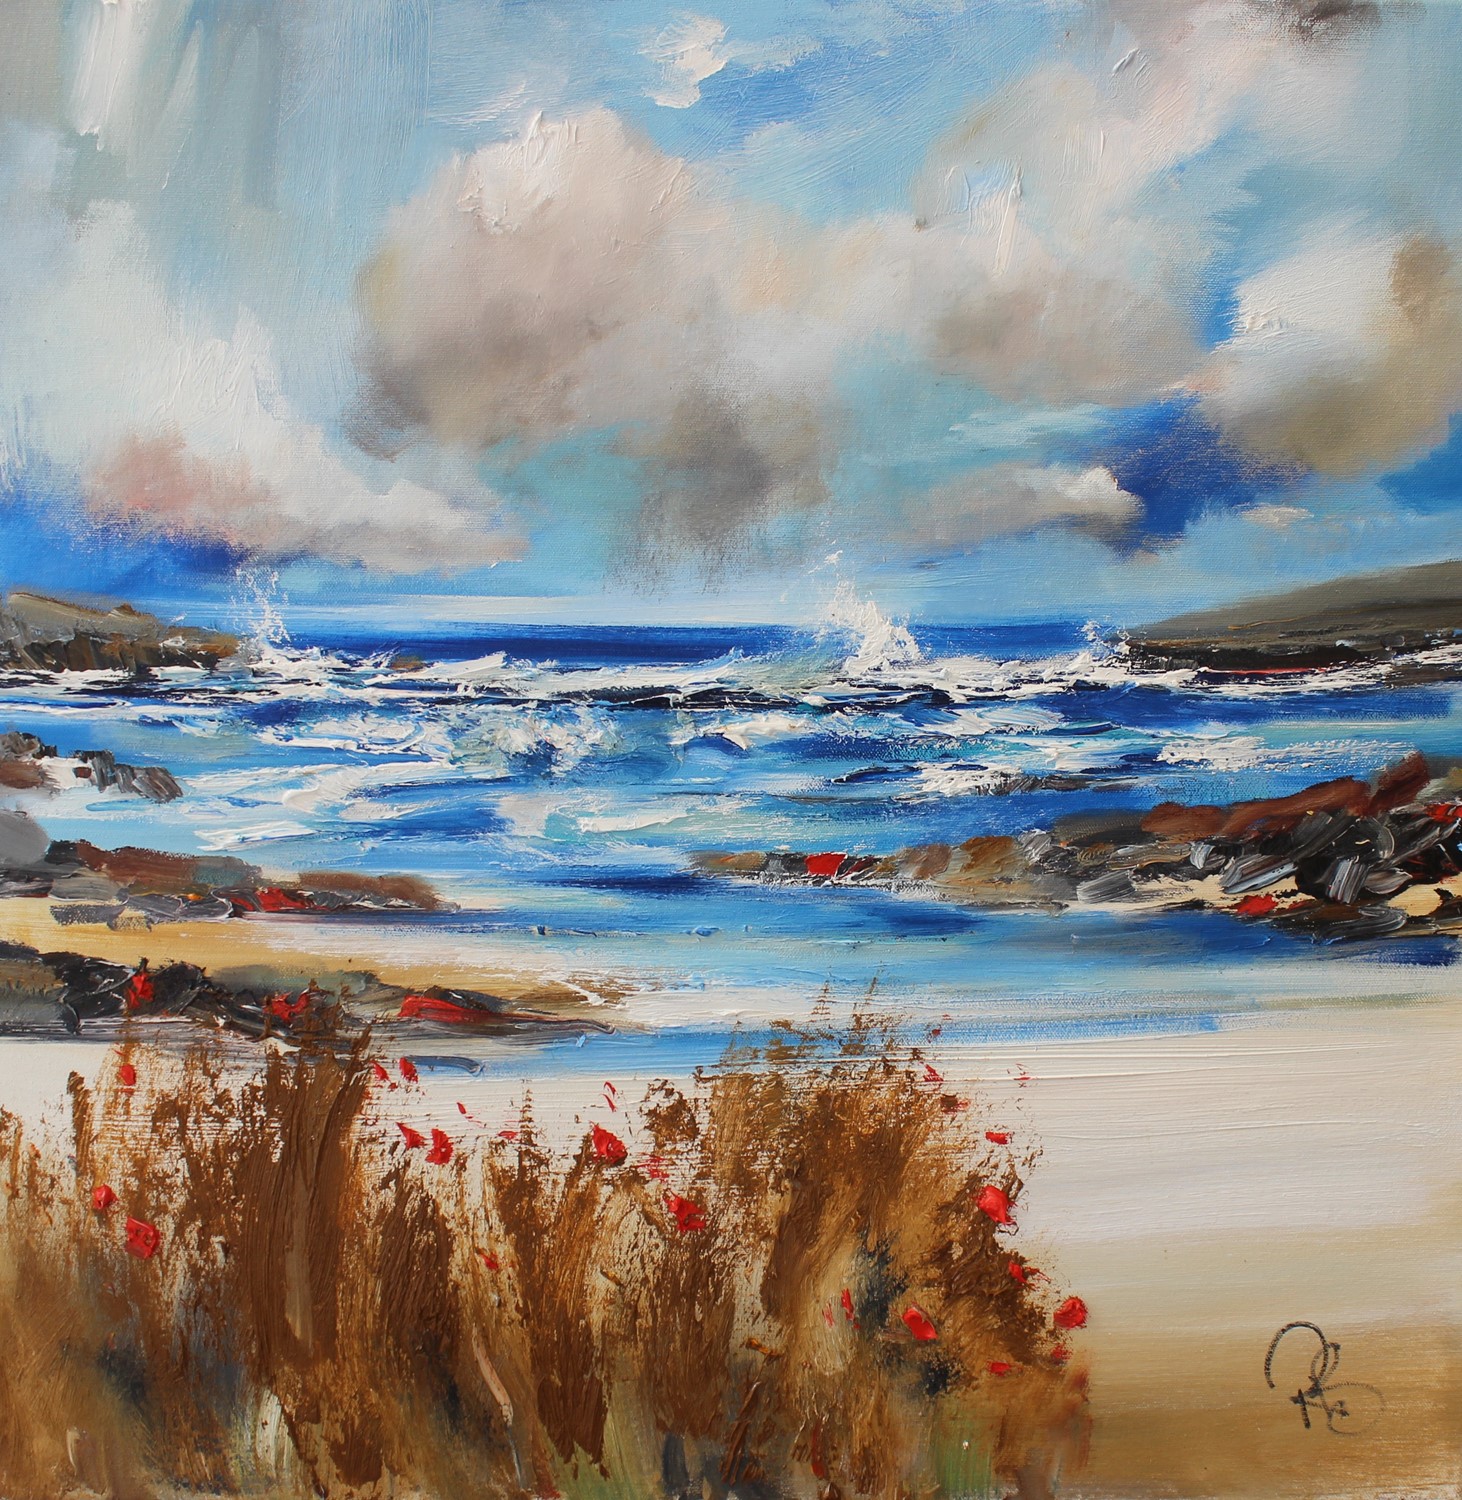 'It's Blustery by the Sea' by artist Rosanne Barr